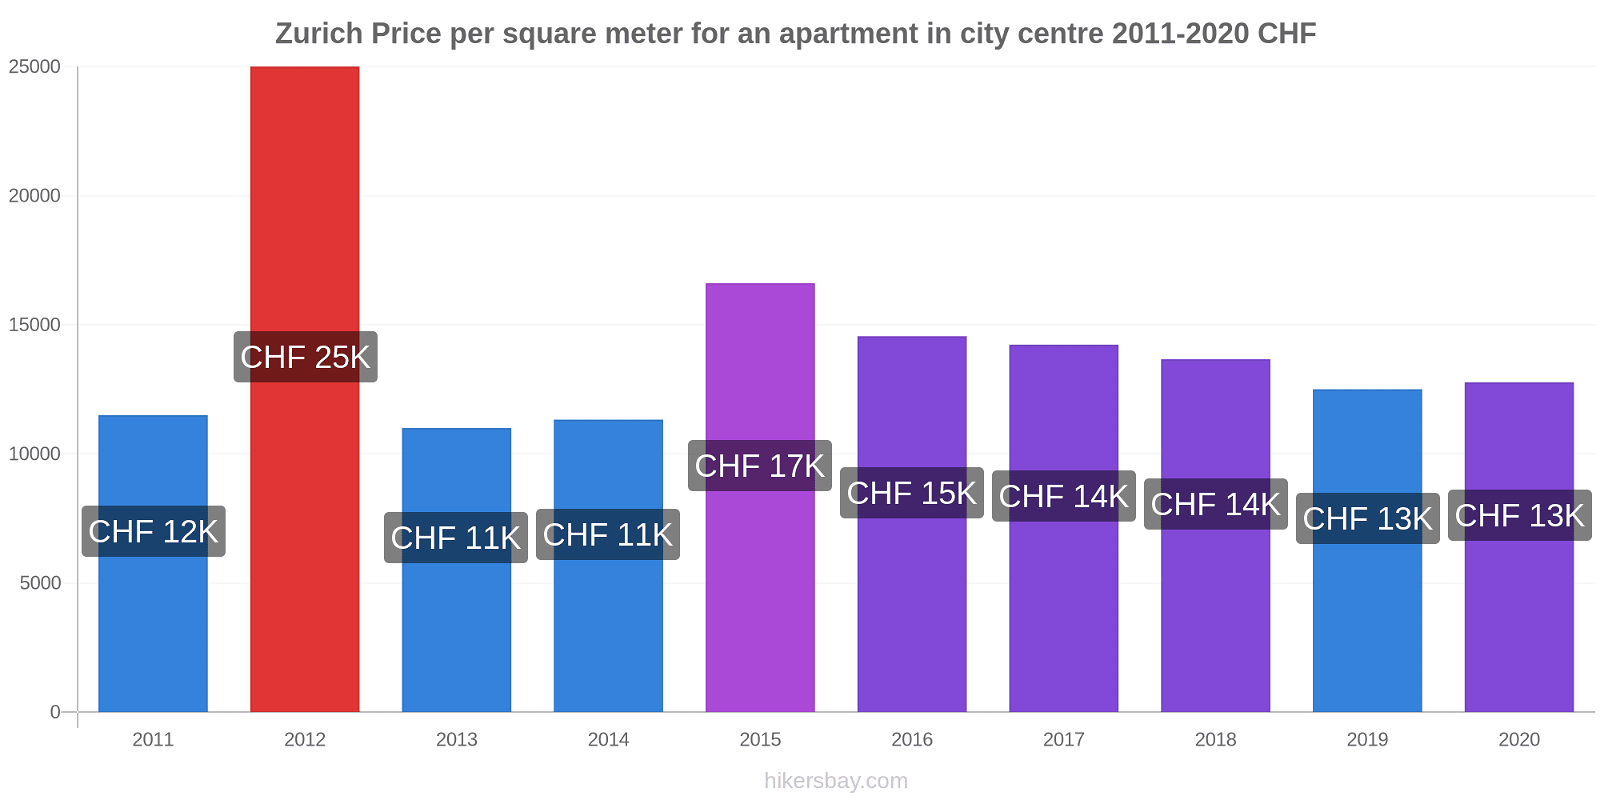 Zurich price changes Price per square meter for an apartment in city centre hikersbay.com